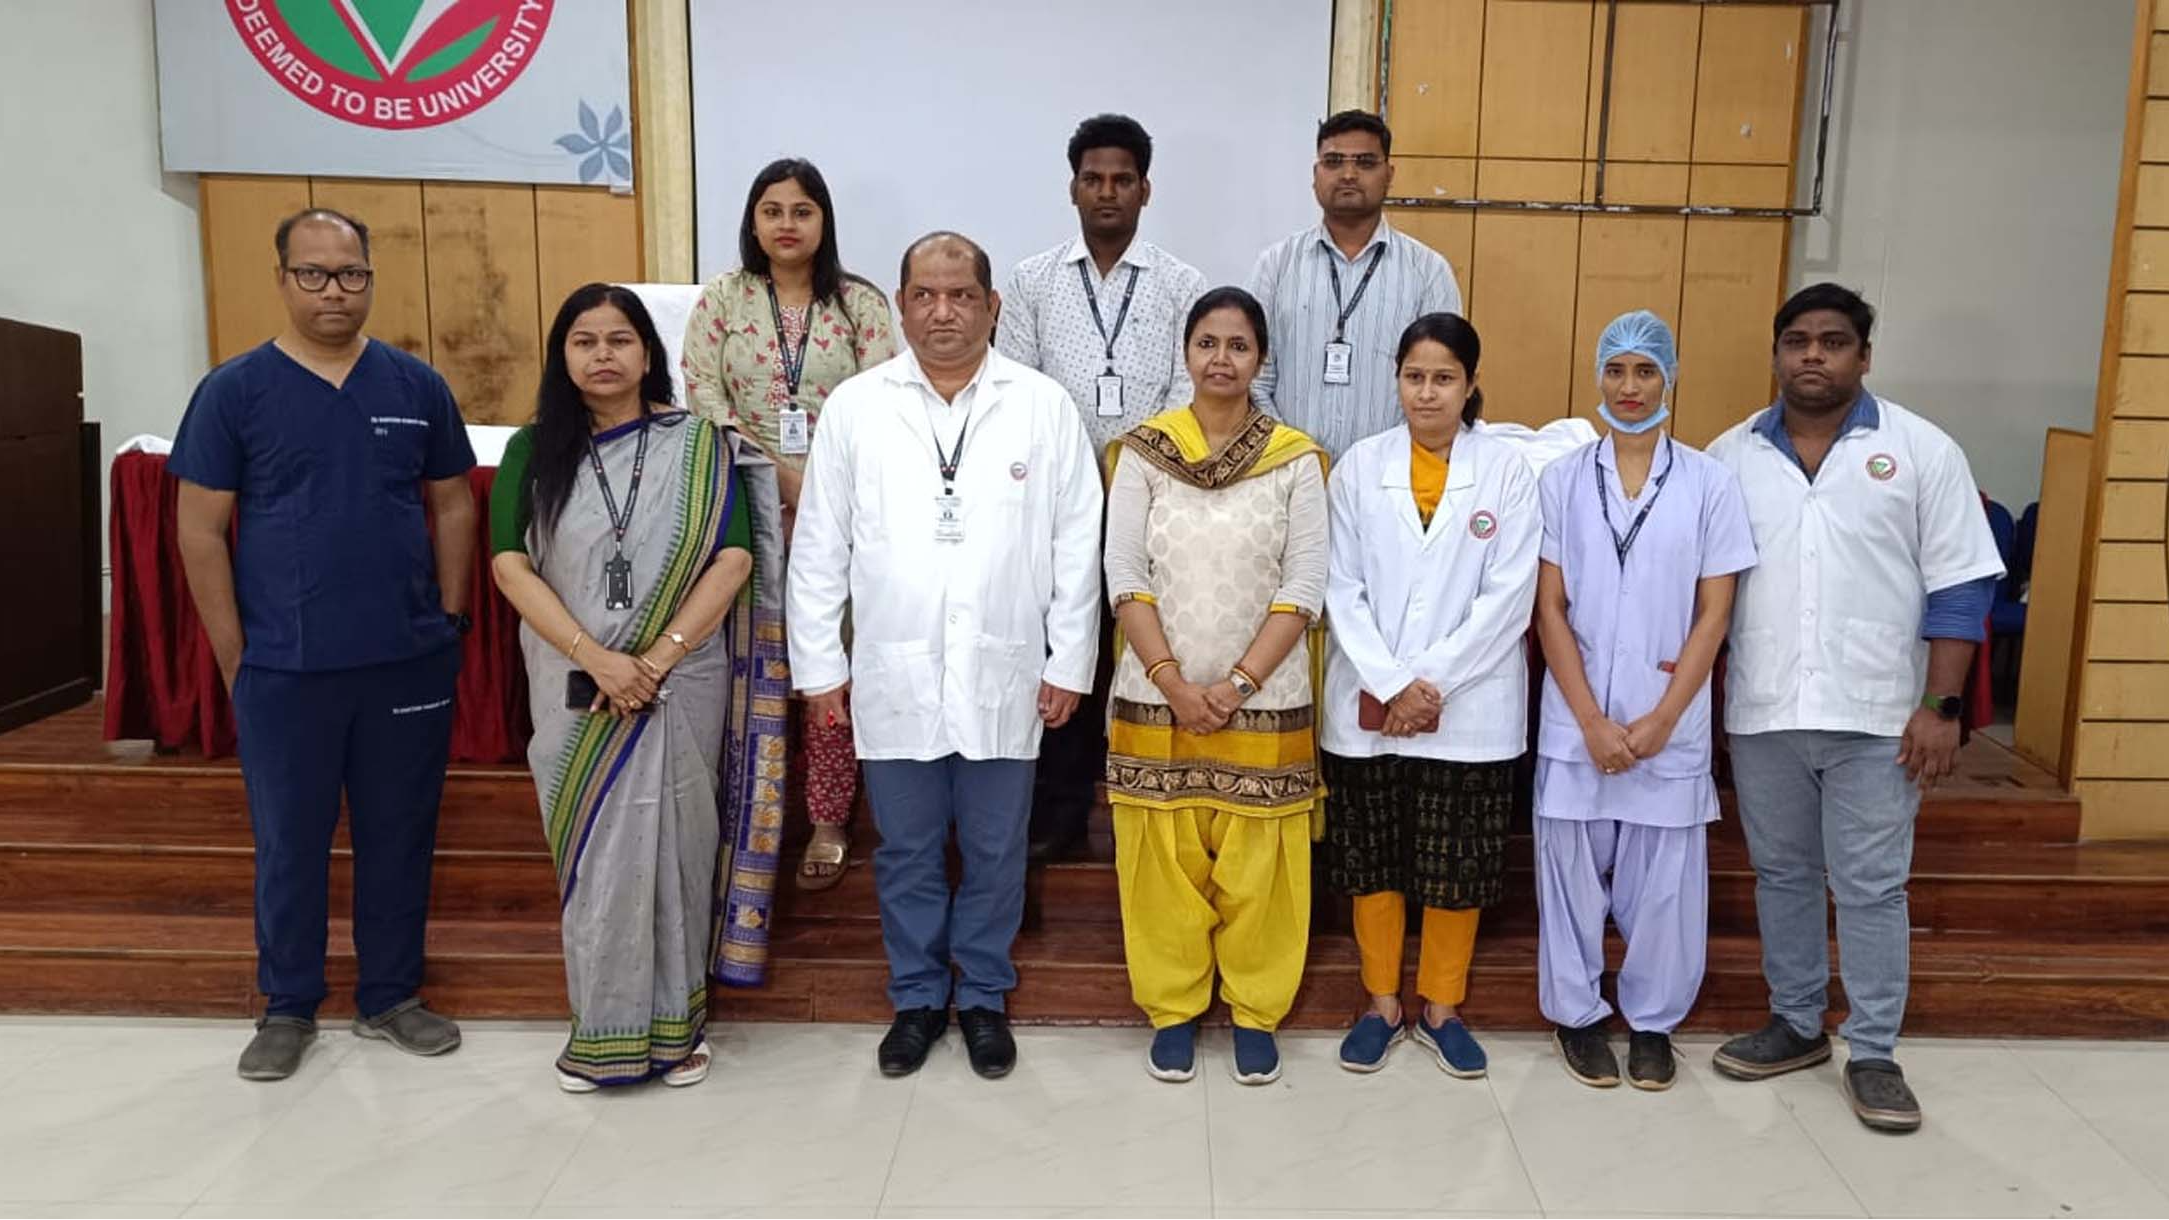 Patient awareness and interaction programme marks World Liver Day at AIIMS Bhubaneswar